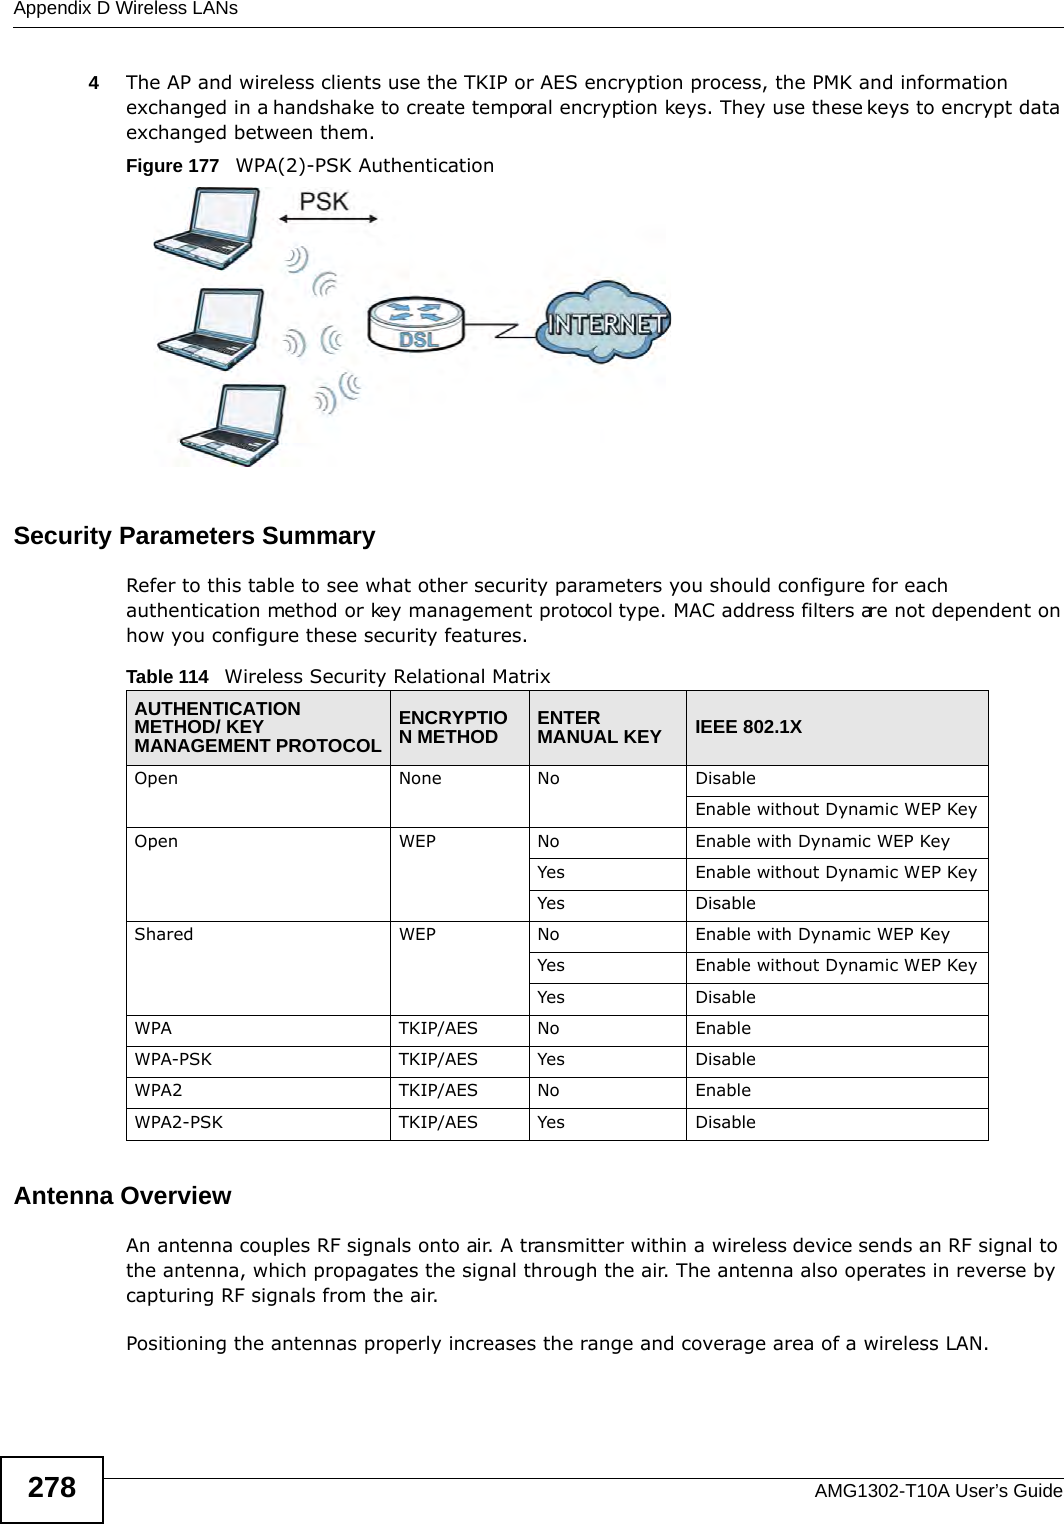 Appendix D Wireless LANsAMG1302-T10A User’s Guide2784The AP and wireless clients use the TKIP or AES encryption process, the PMK and information exchanged in a handshake to create temporal encryption keys. They use these keys to encrypt data exchanged between them.Figure 177   WPA(2)-PSK AuthenticationSecurity Parameters SummaryRefer to this table to see what other security parameters you should configure for each authentication method or key management protocol type. MAC address filters are not dependent on how you configure these security features.Antenna OverviewAn antenna couples RF signals onto air. A transmitter within a wireless device sends an RF signal to the antenna, which propagates the signal through the air. The antenna also operates in reverse by capturing RF signals from the air. Positioning the antennas properly increases the range and coverage area of a wireless LAN. Table 114   Wireless Security Relational MatrixAUTHENTICATION METHOD/ KEY MANAGEMENT PROTOCOLENCRYPTION METHOD ENTER MANUAL KEY IEEE 802.1XOpen None No DisableEnable without Dynamic WEP KeyOpen WEP No           Enable with Dynamic WEP KeyYes Enable without Dynamic WEP KeyYes DisableShared WEP  No           Enable with Dynamic WEP KeyYes Enable without Dynamic WEP KeyYes DisableWPA  TKIP/AES No EnableWPA-PSK  TKIP/AES Yes DisableWPA2 TKIP/AES No EnableWPA2-PSK  TKIP/AES Yes Disable